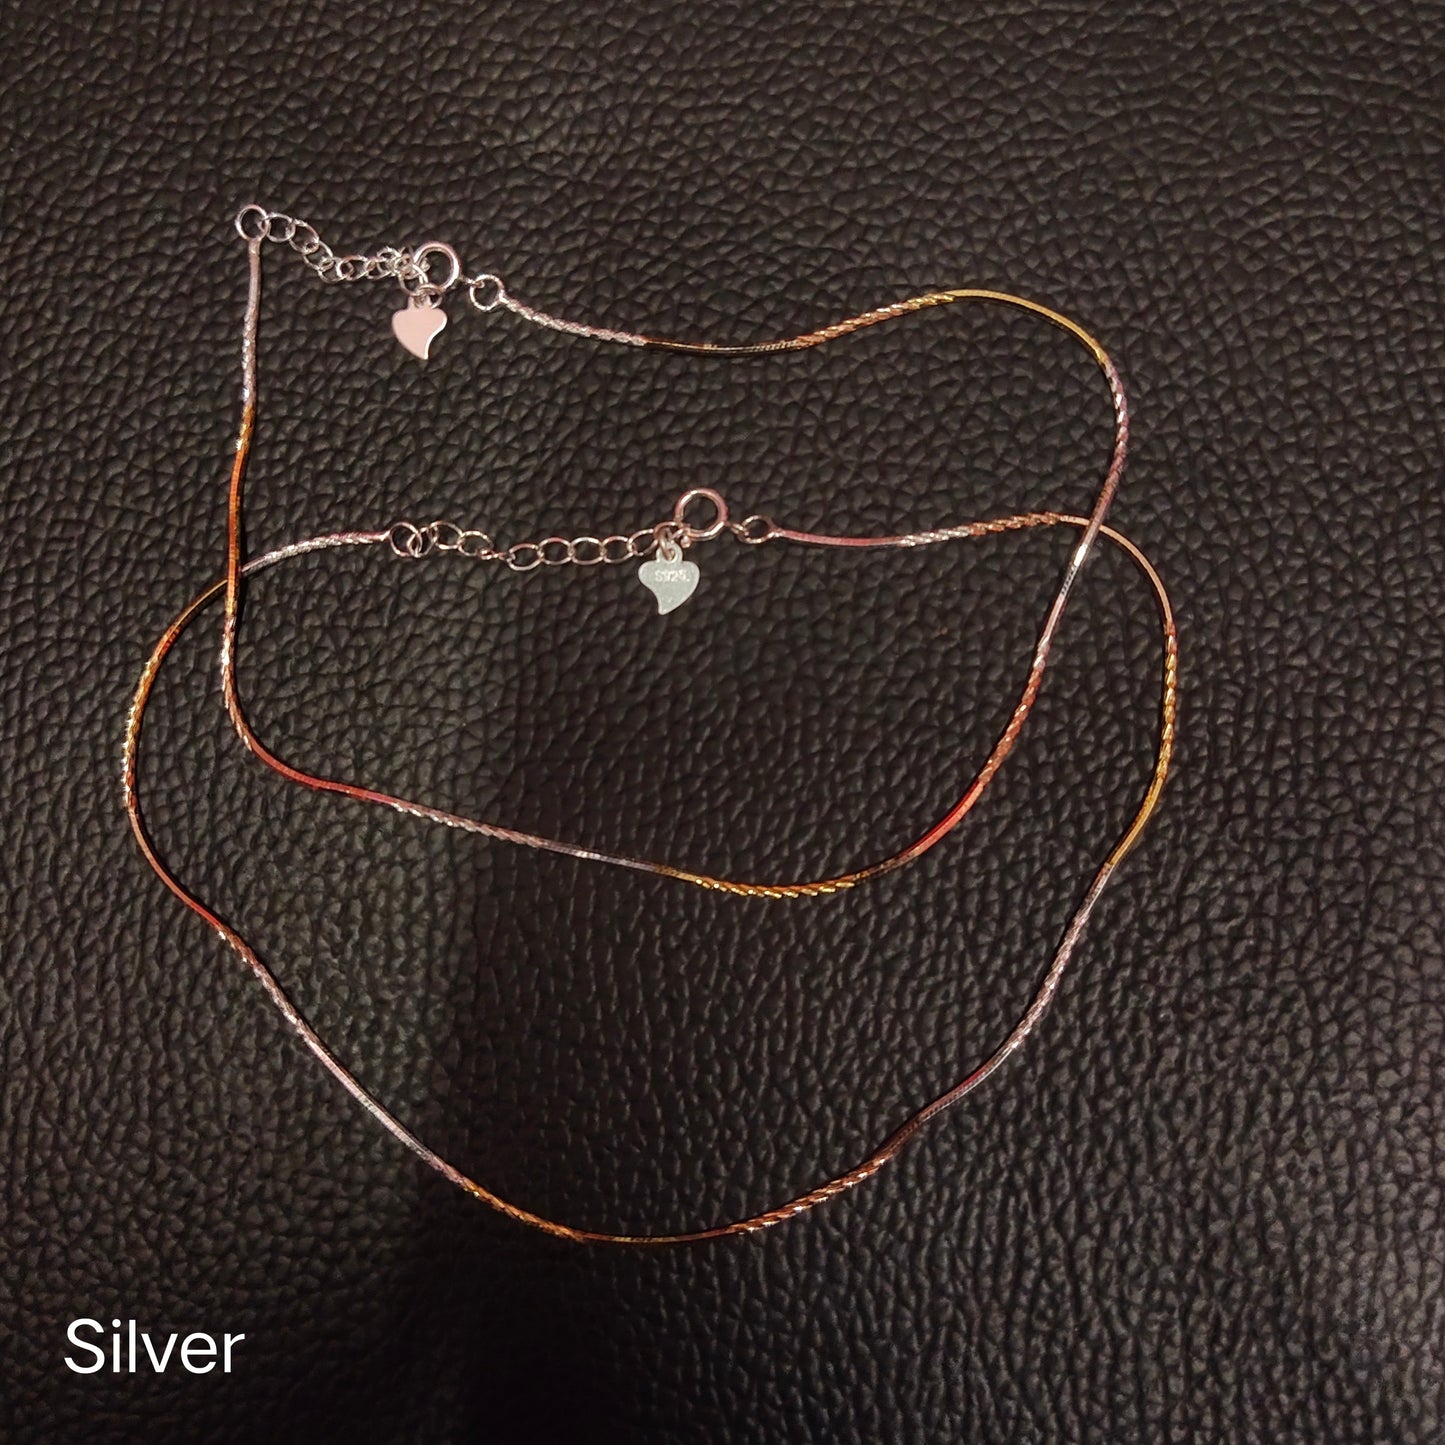 Discover the Allure of ASP Silver's Exquisite 925 Silver Double Tone Anklets